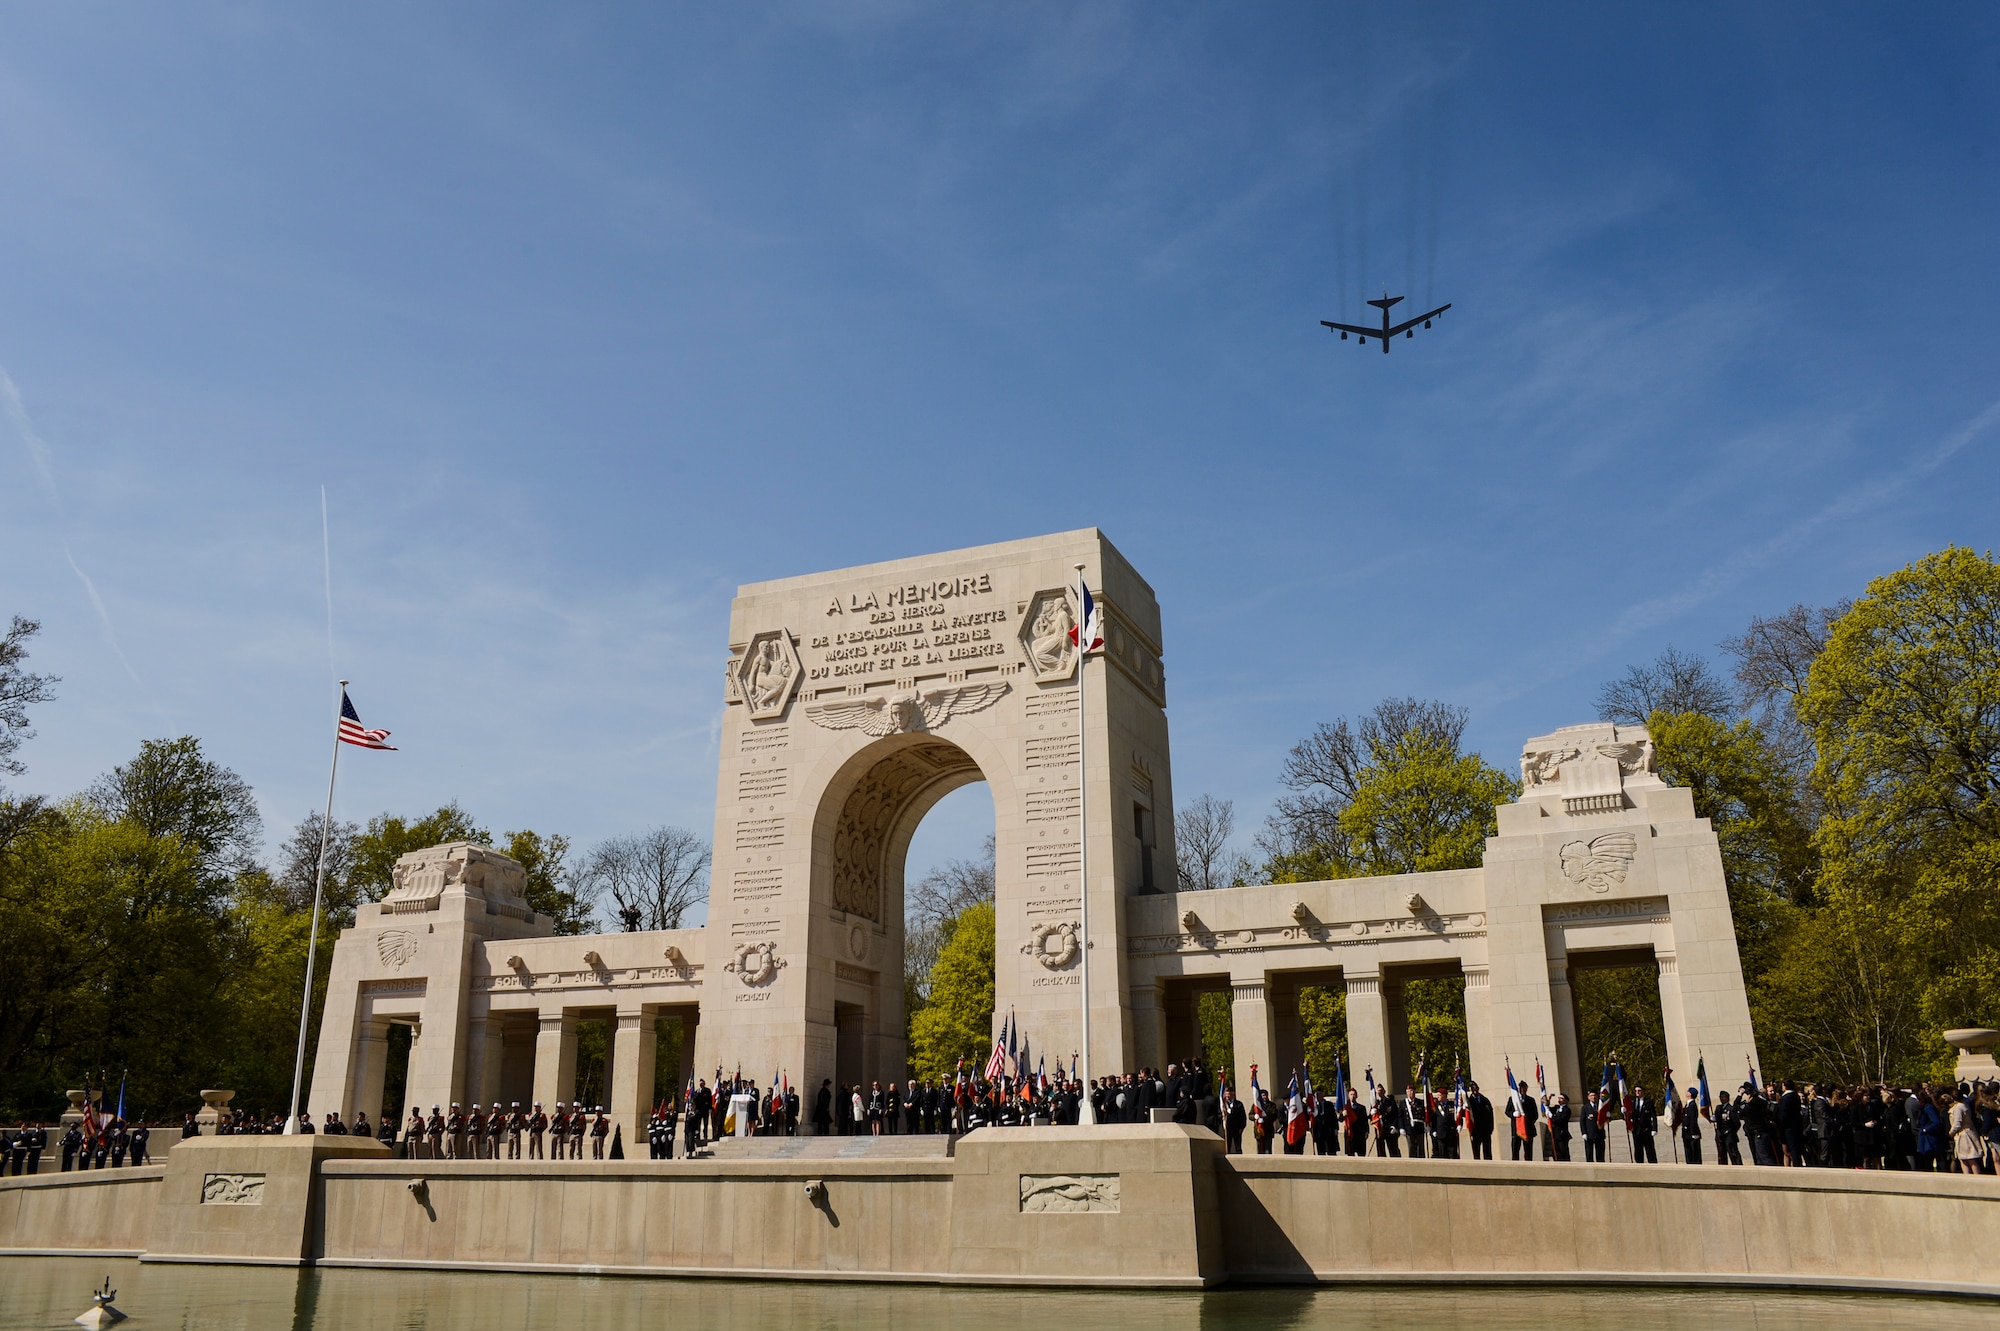 A U.S. Air Force B-52 Stratofortress from Minot Air Force Base, N.D., flies over the Lafayette Escadrille Memorial in Marnes-la-Coquette, France, April 20, 2016, during a ceremony honoring the 268 Americans who joined the French air force before the U.S. officially entered World War I. (U.S. Air Force photo/Tech. Sgt. Joshua DeMotts)